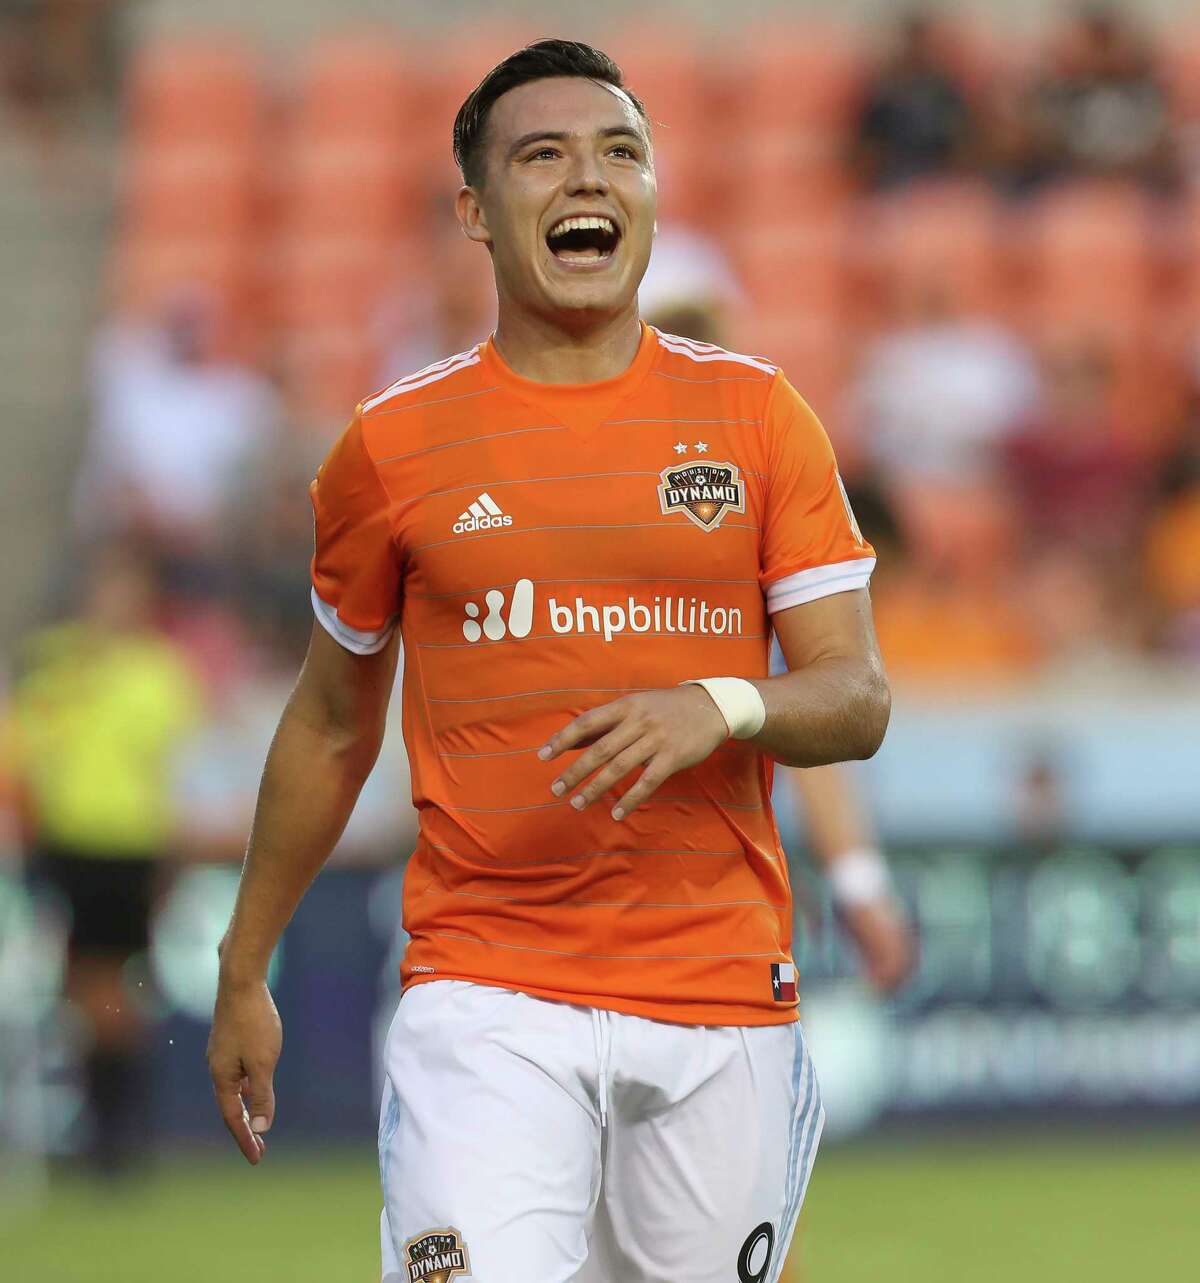 Dynamo forward Erick Torres was named to Mexico's team as an injury substitution. Mexico is favored to at least reach the final of the tournament, if not win it.